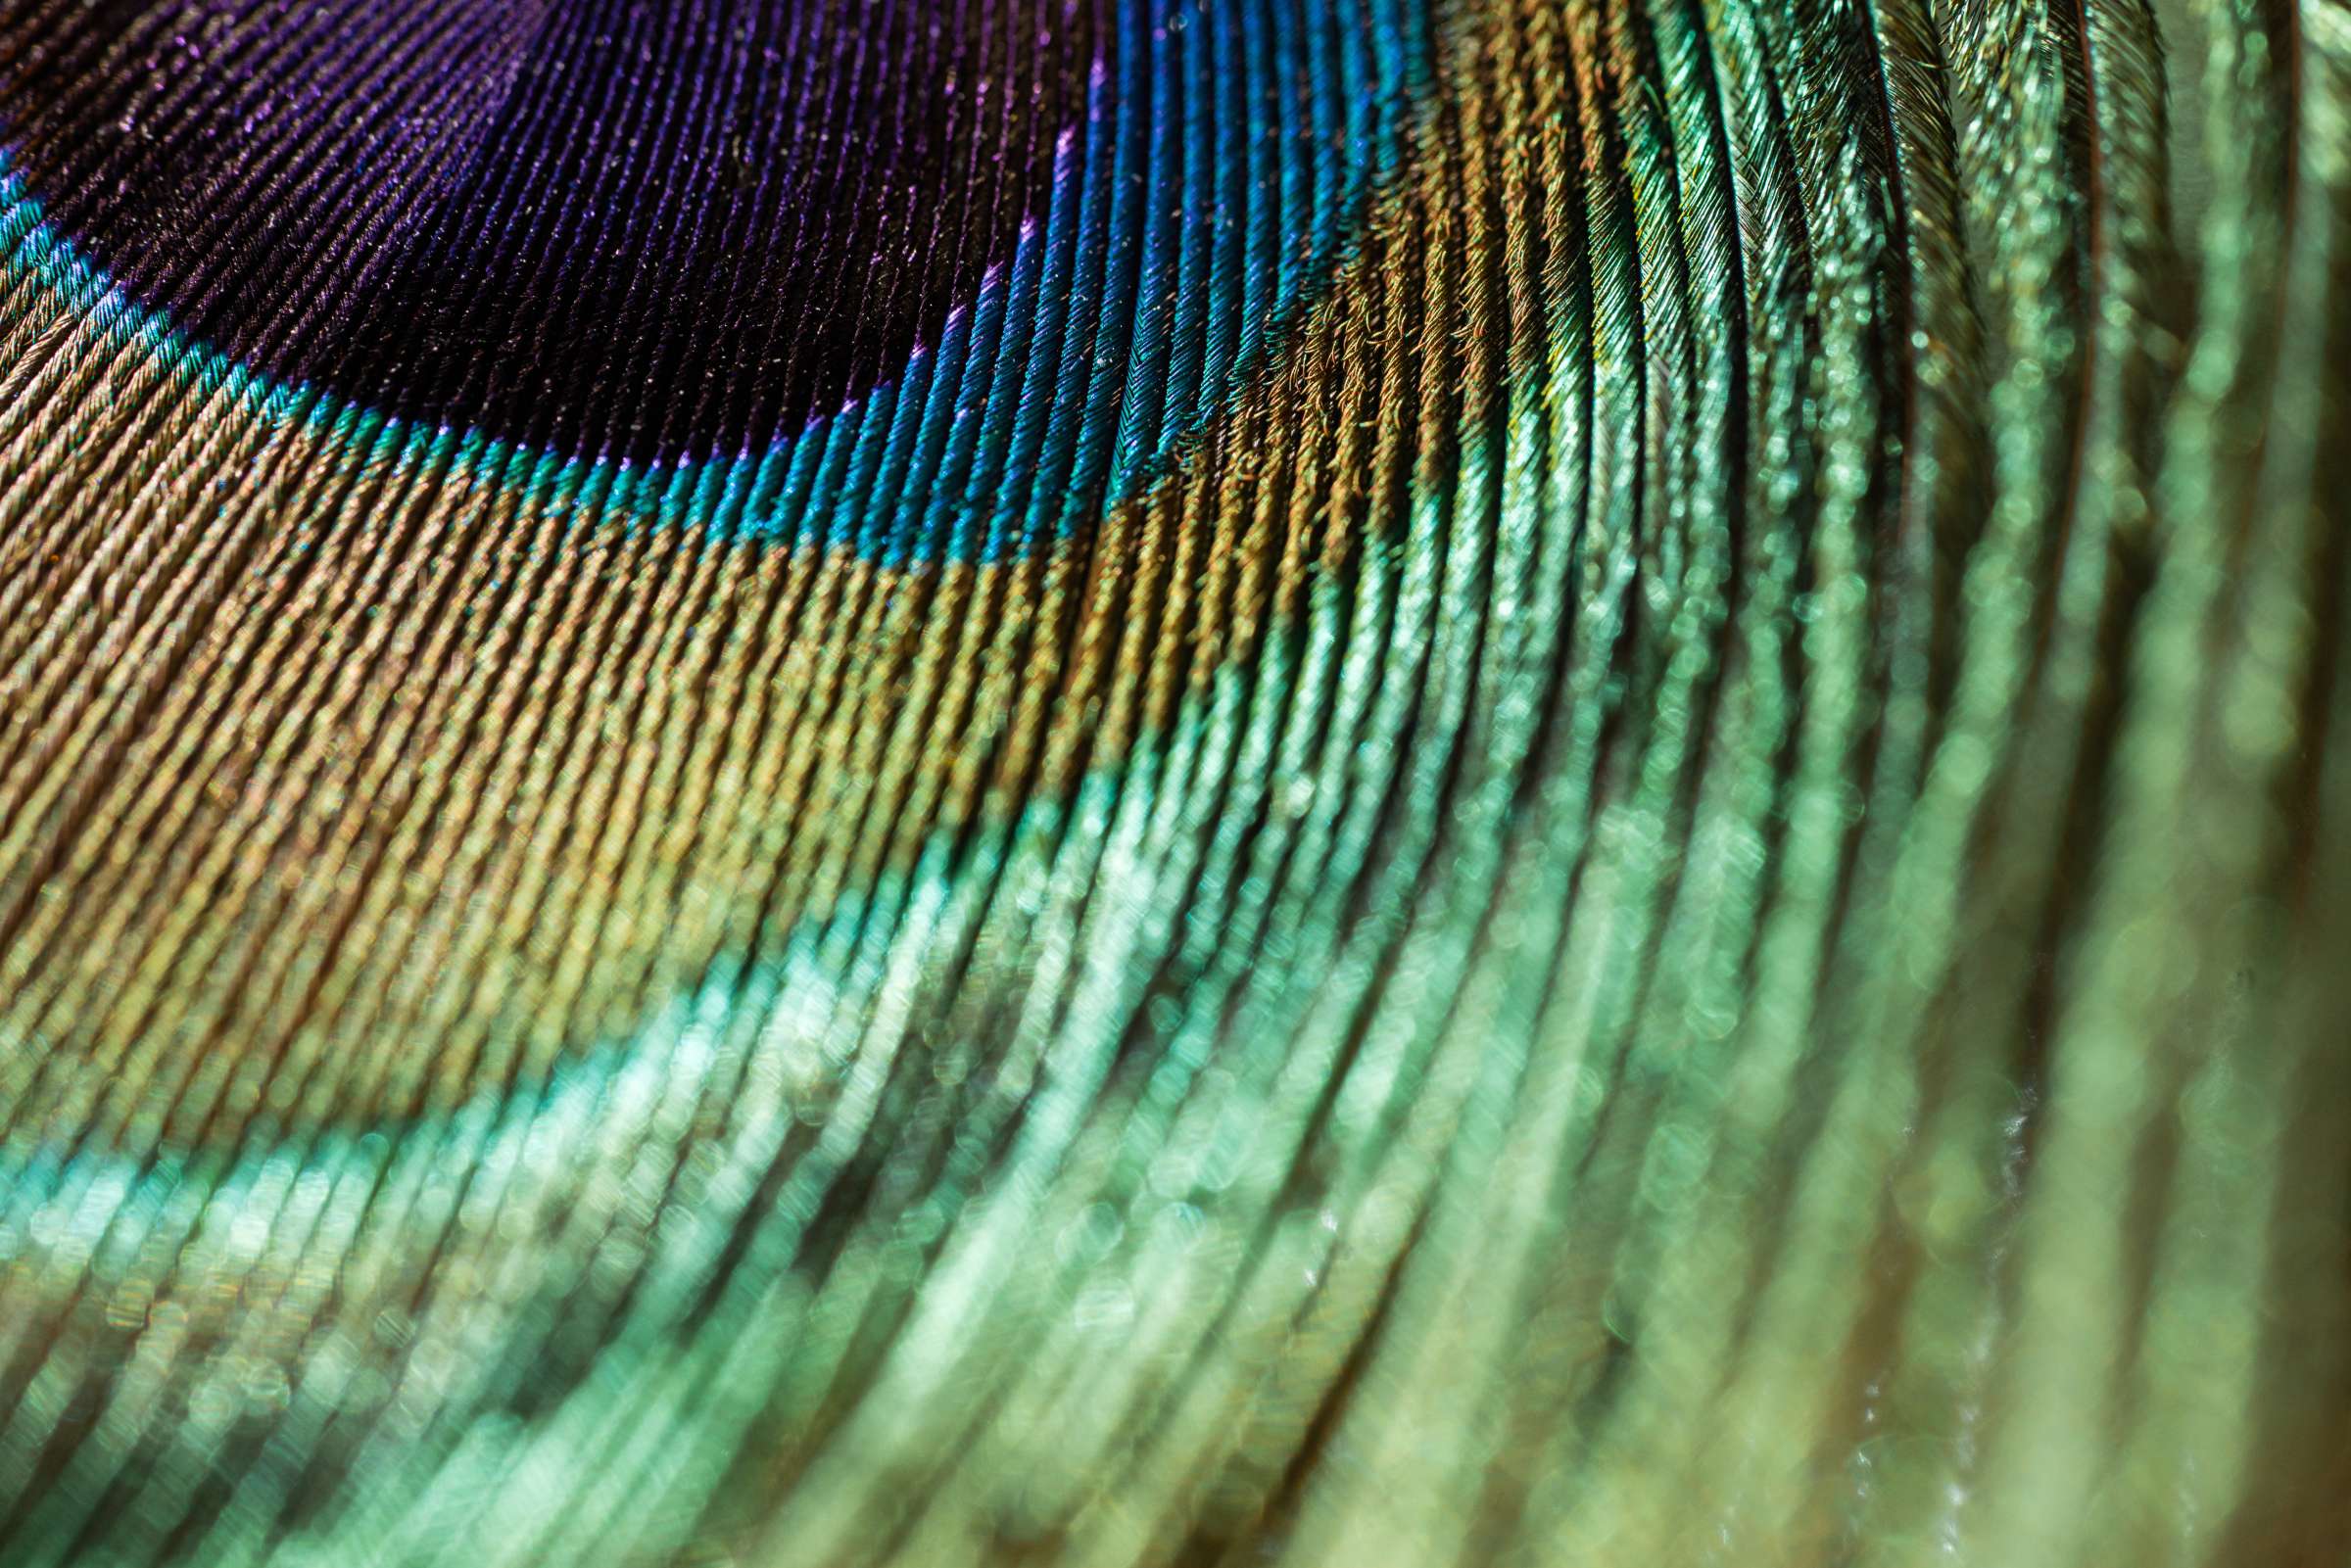 A close-up photograph of a peacock feather